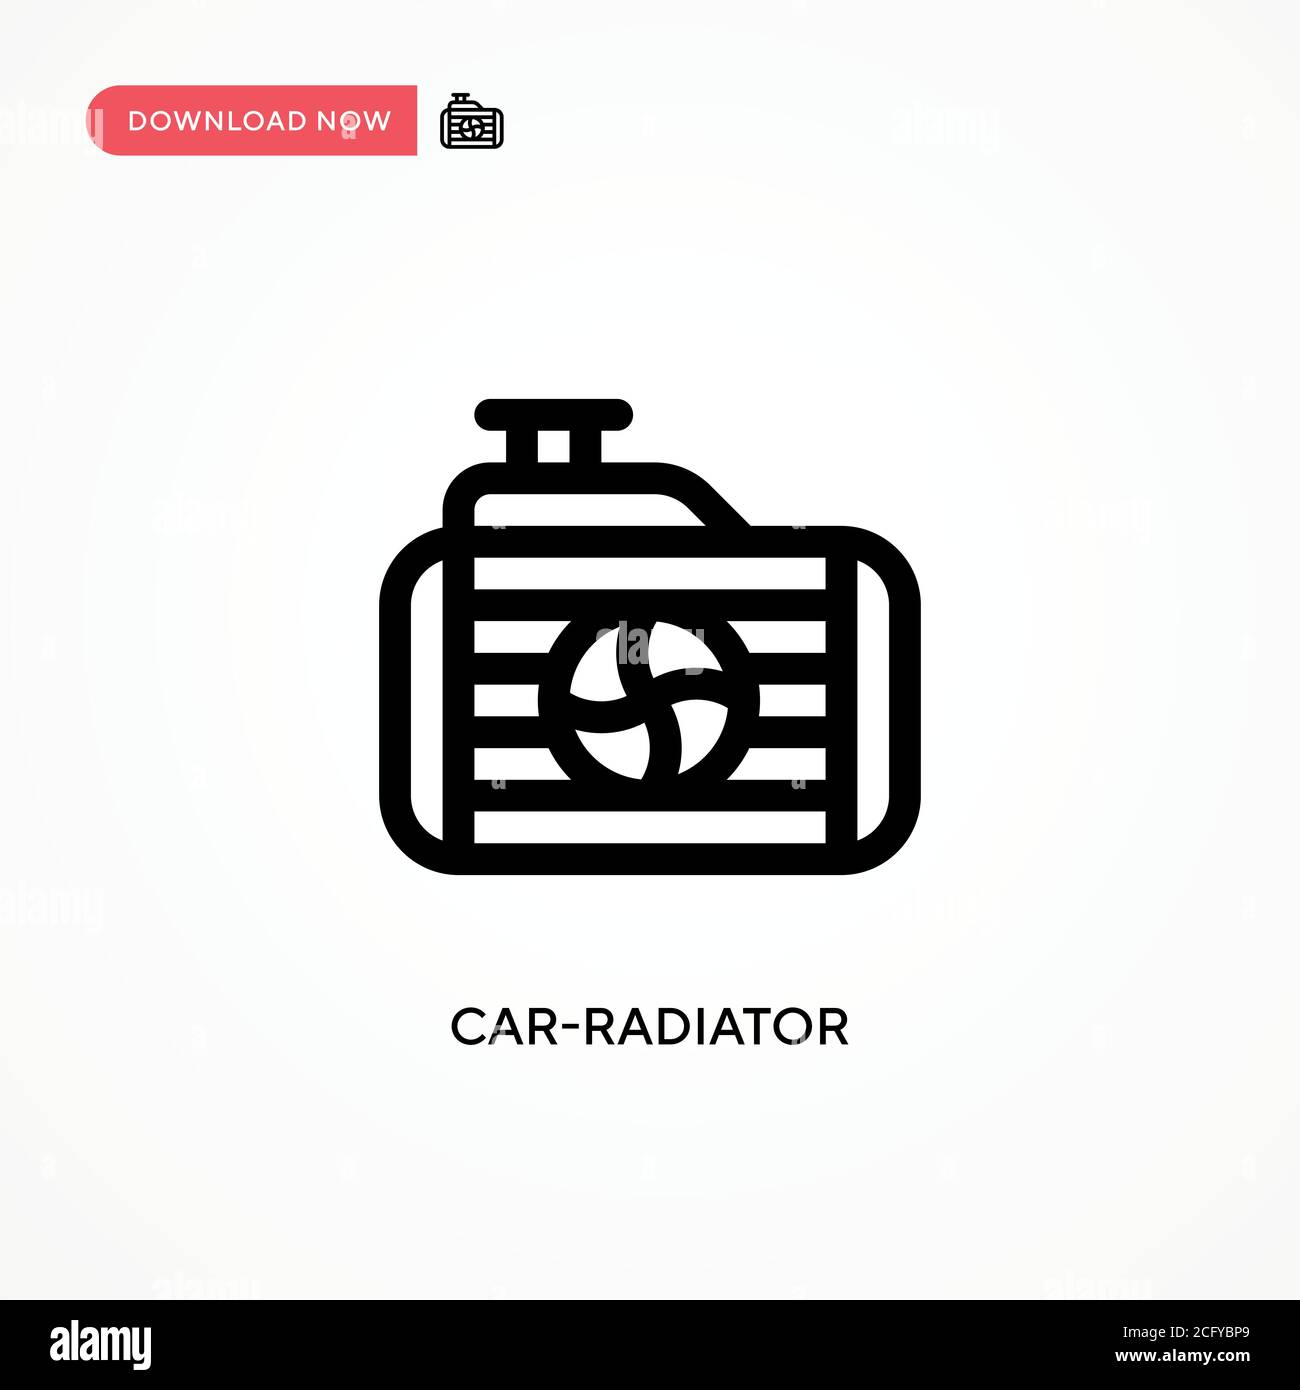 Car-radiator Simple vector icon. Modern, simple flat vector illustration for web site or mobile app Stock Vector